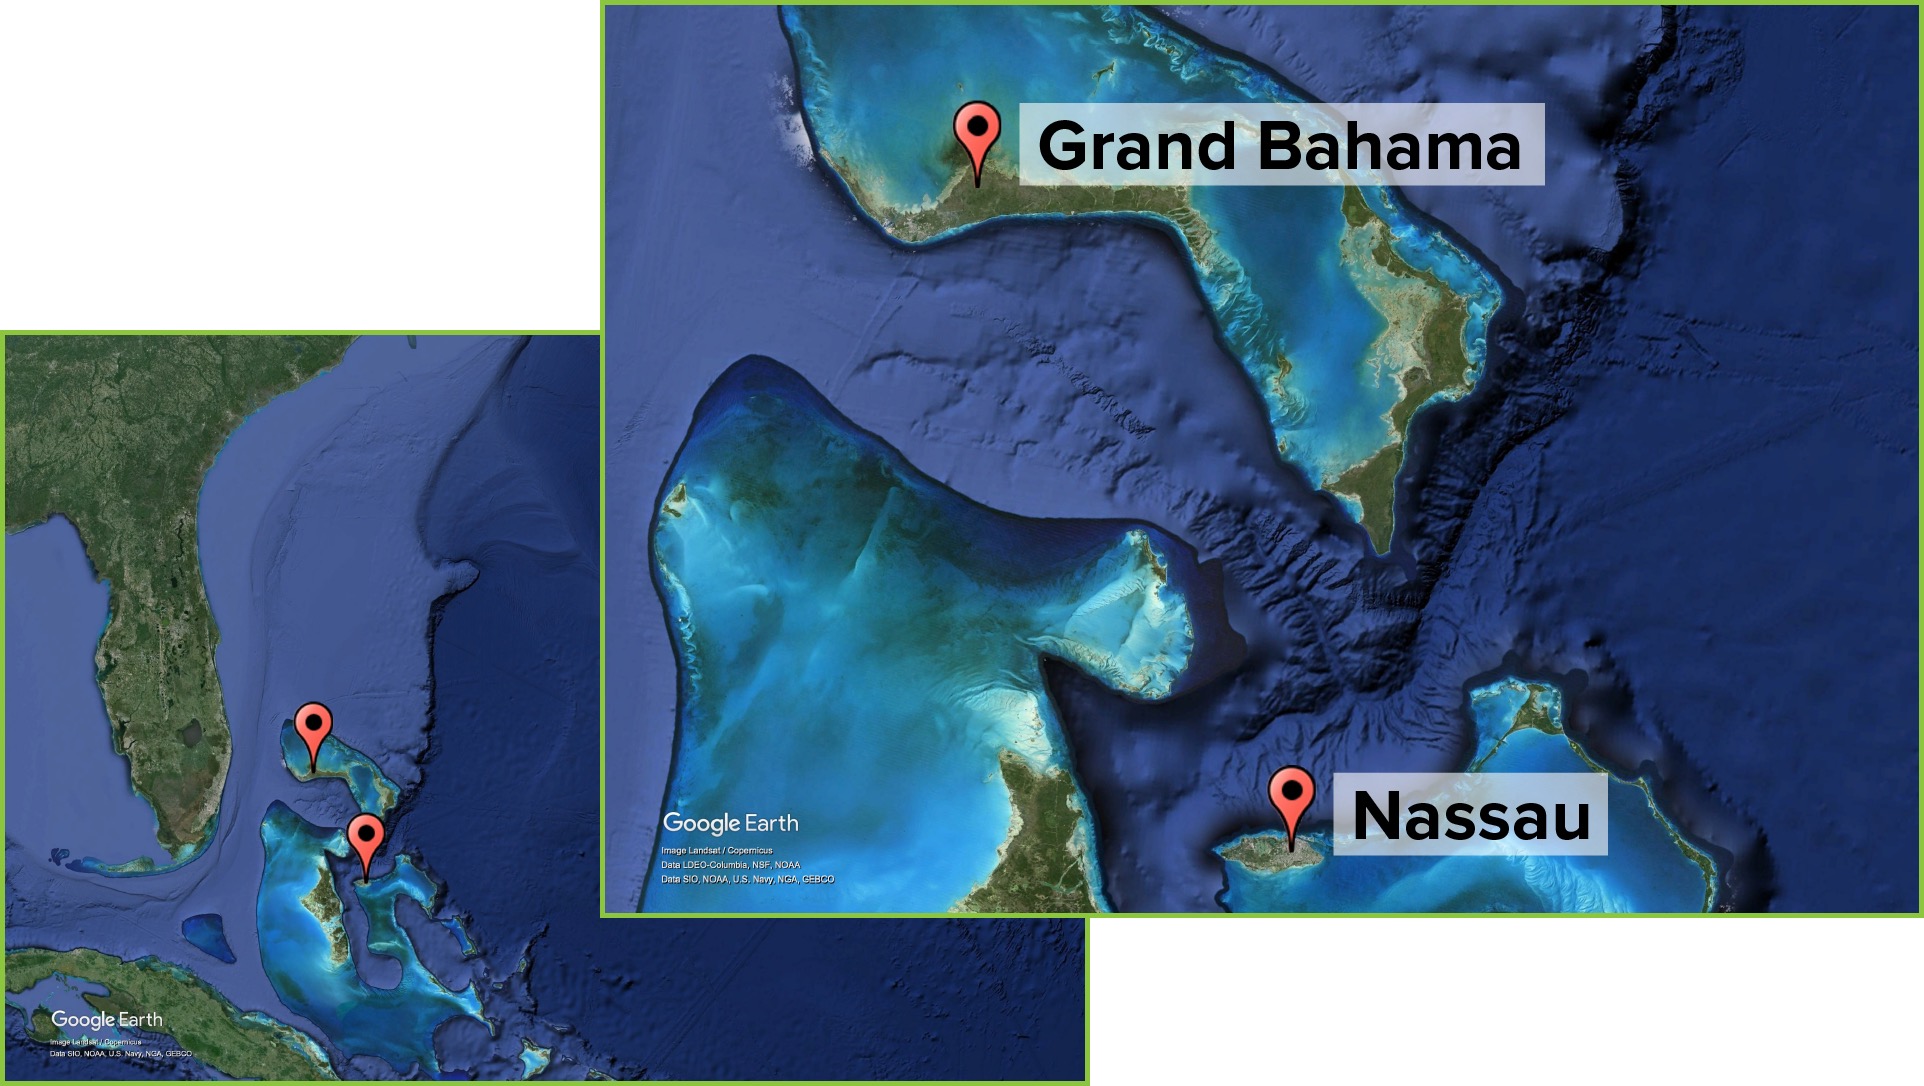 Google Earth image of the Bahamas with three locations marked. A second image shows the locations in closer detail with the labels Grand Bahama and Nassau.